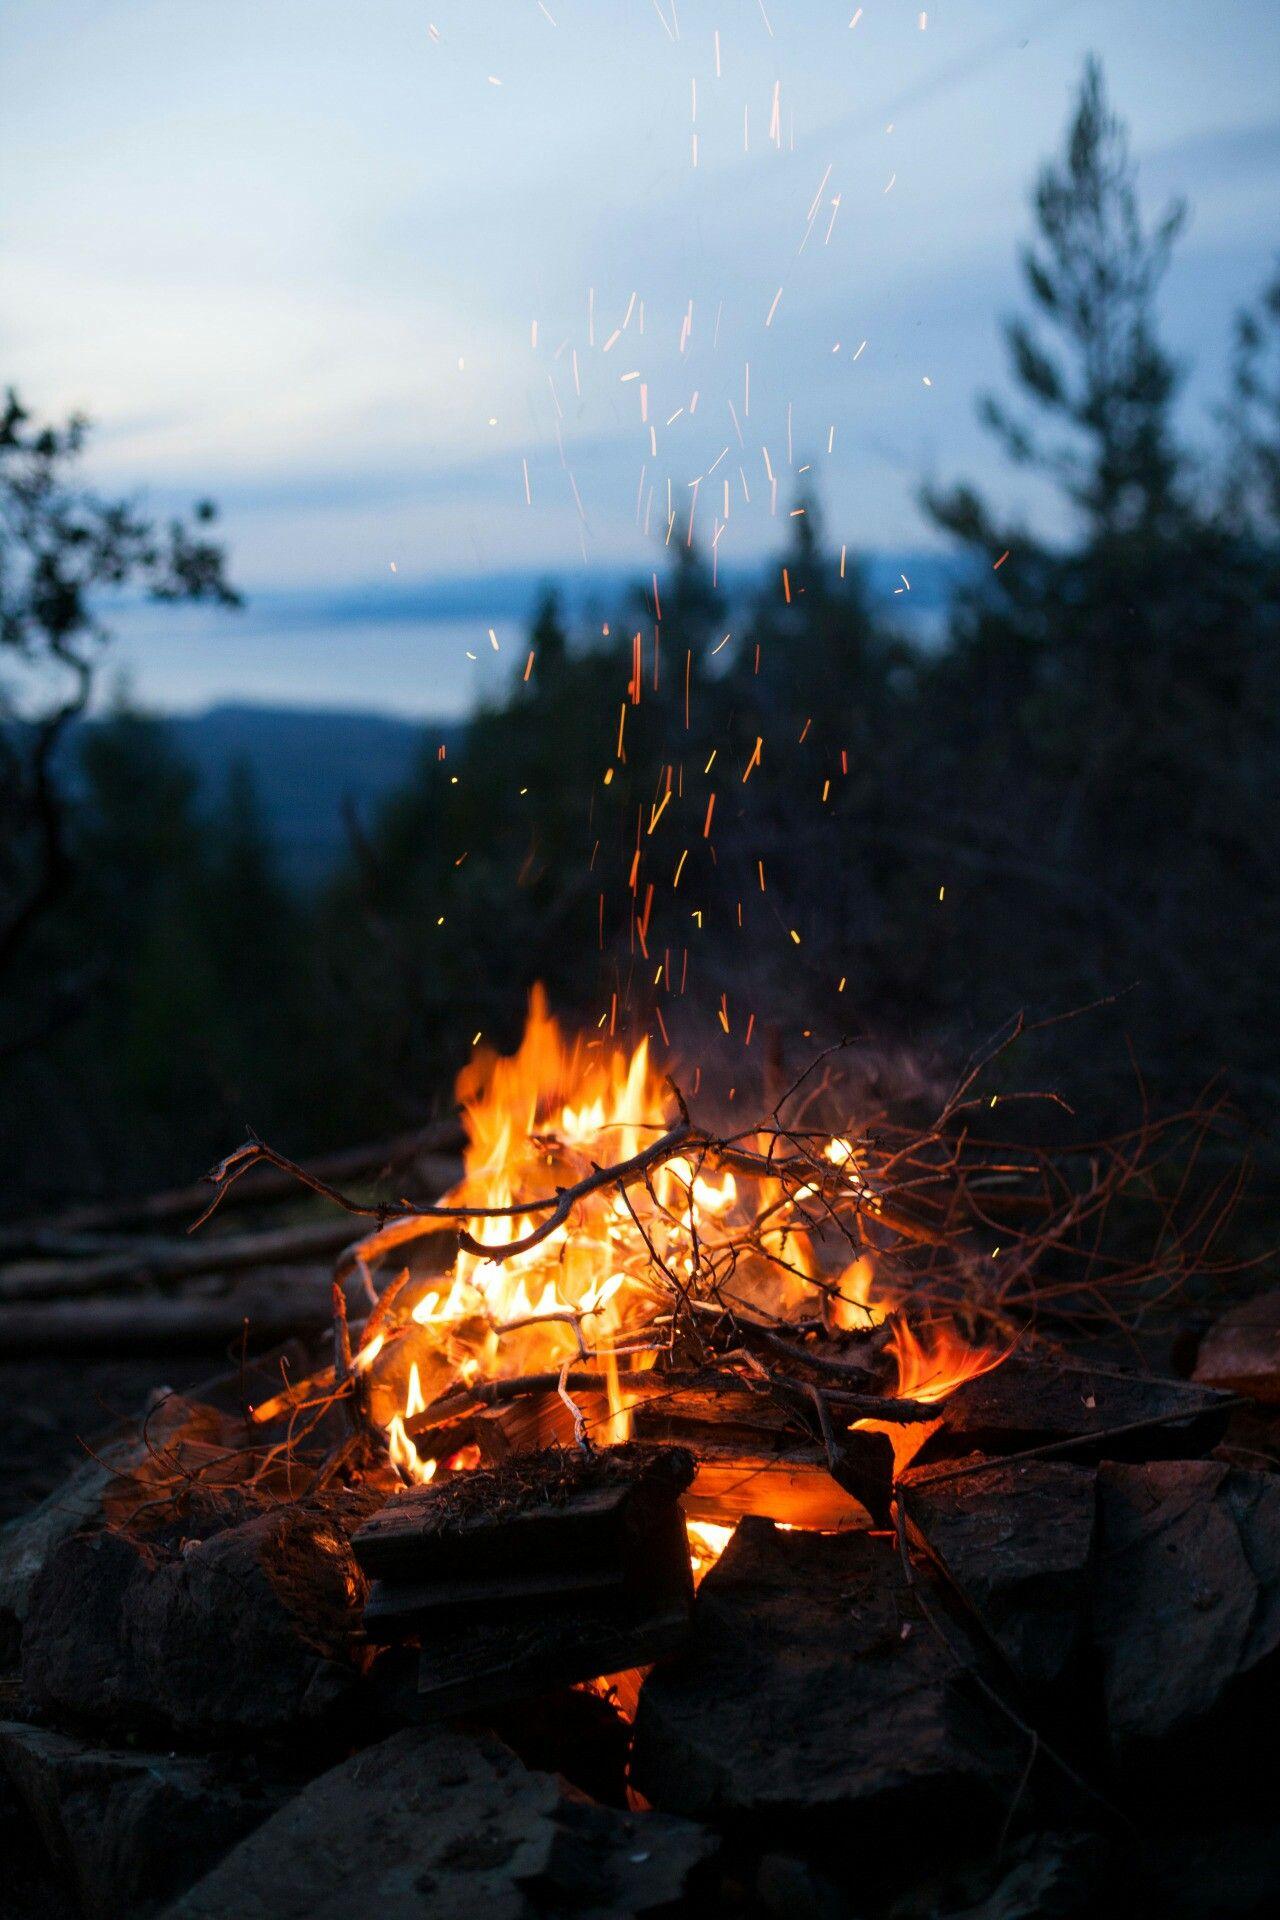 A campfire with sparks flying in the air - Fall iPhone, camping